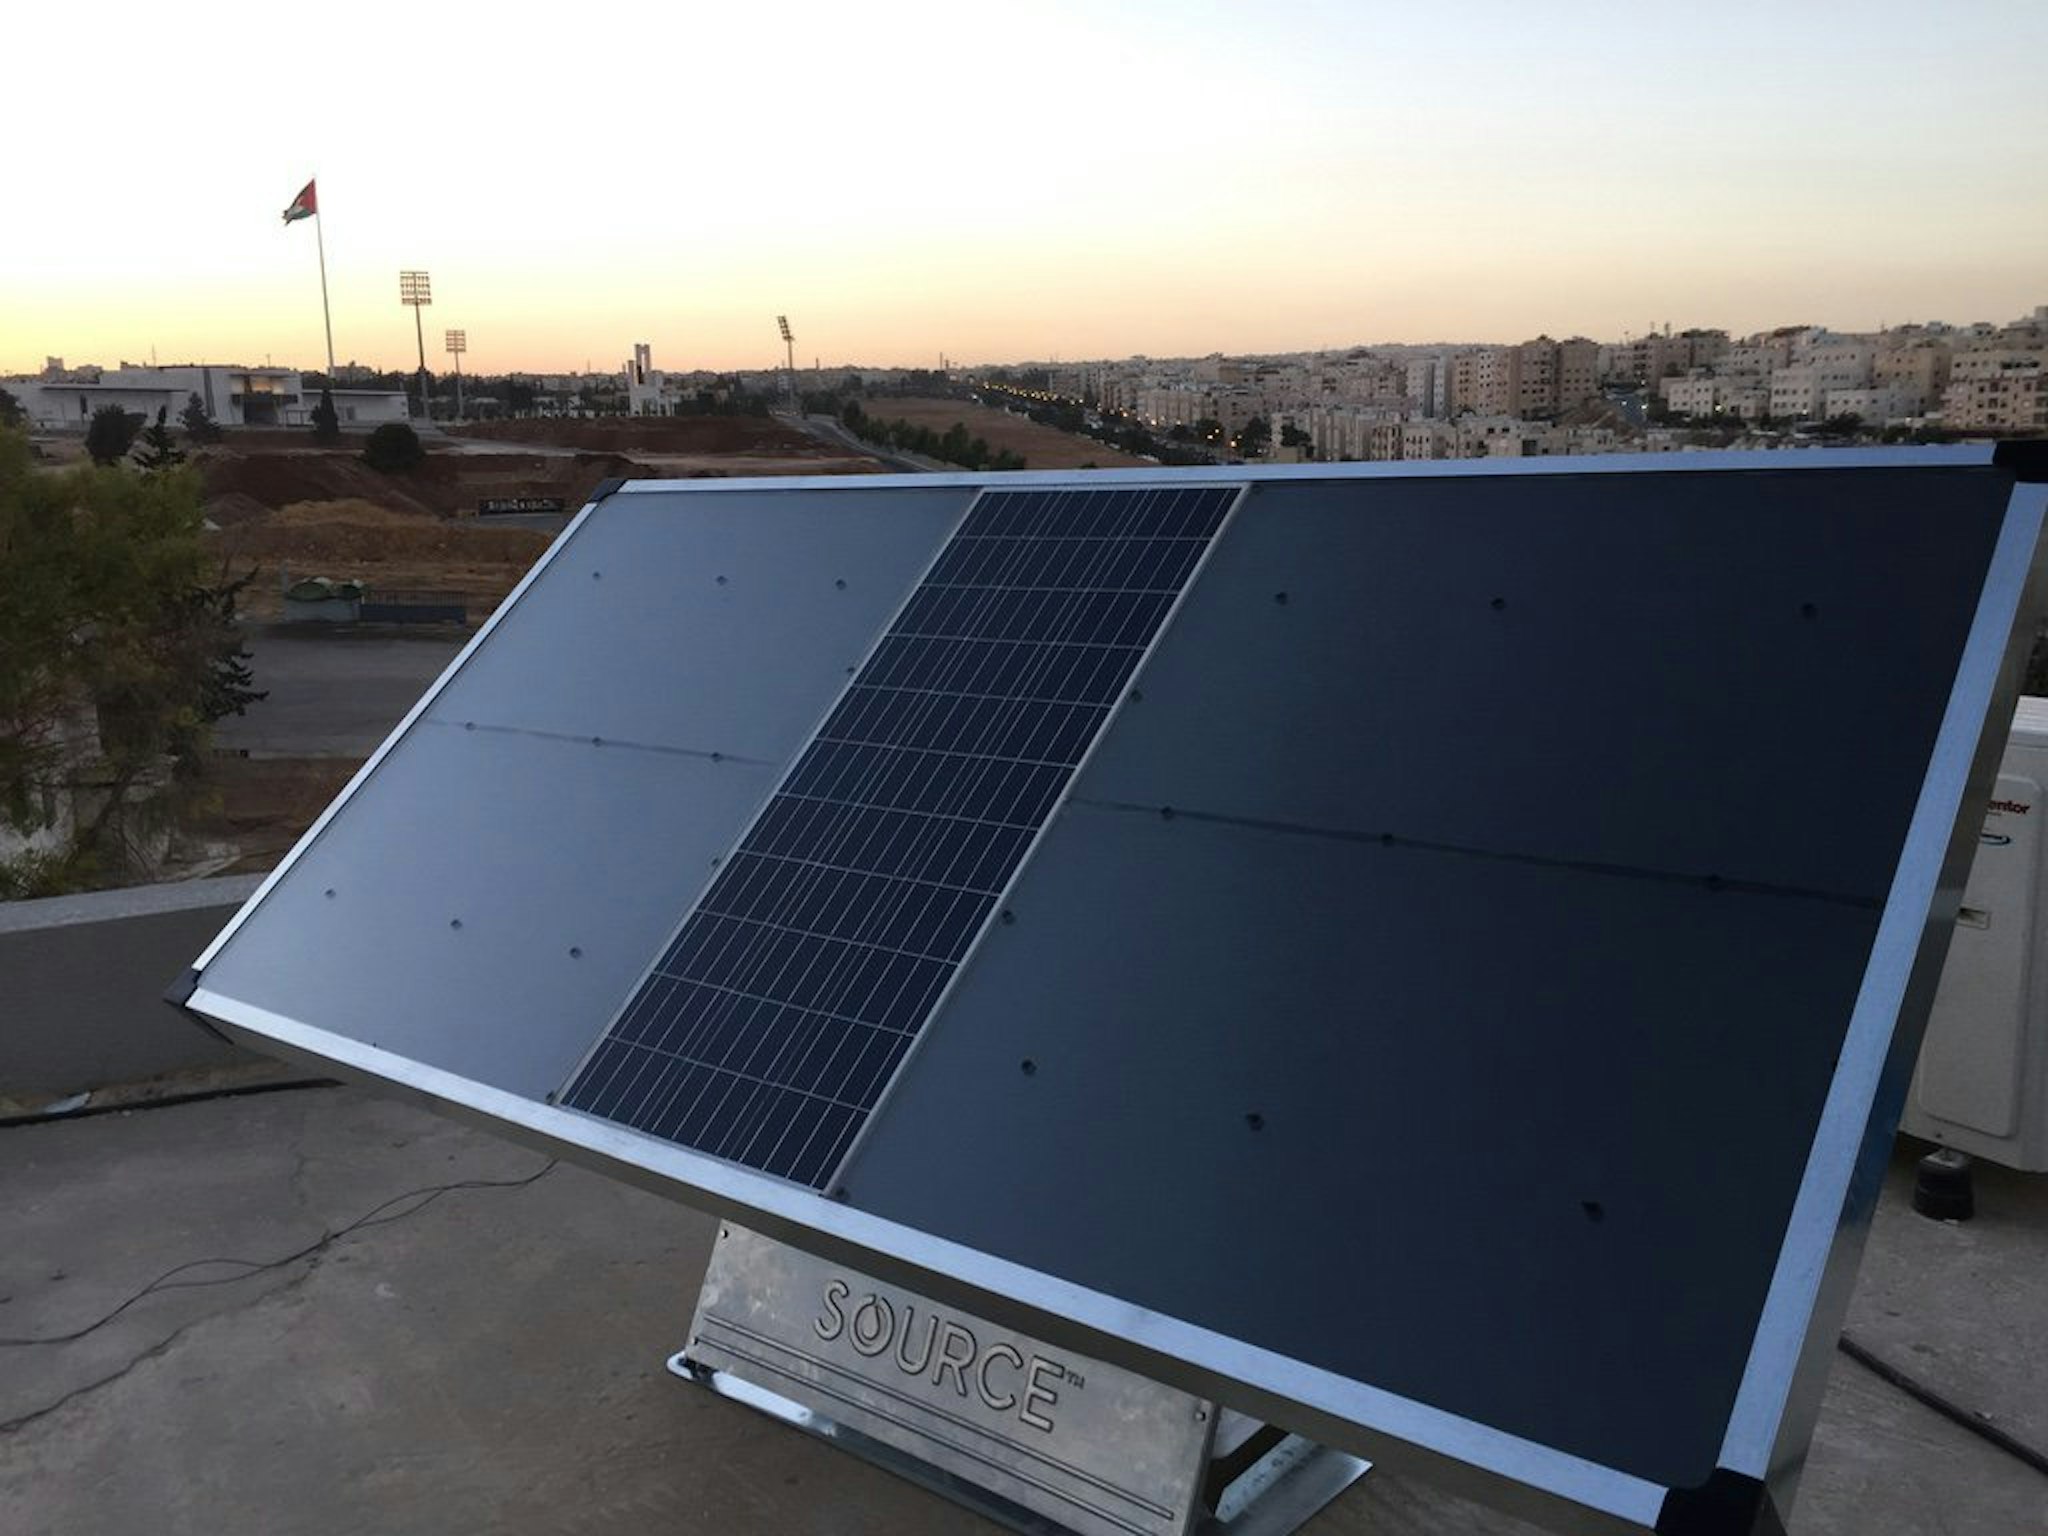 Zero Mass Water Uses Solar Panels to Provide Clean H2O Inverse